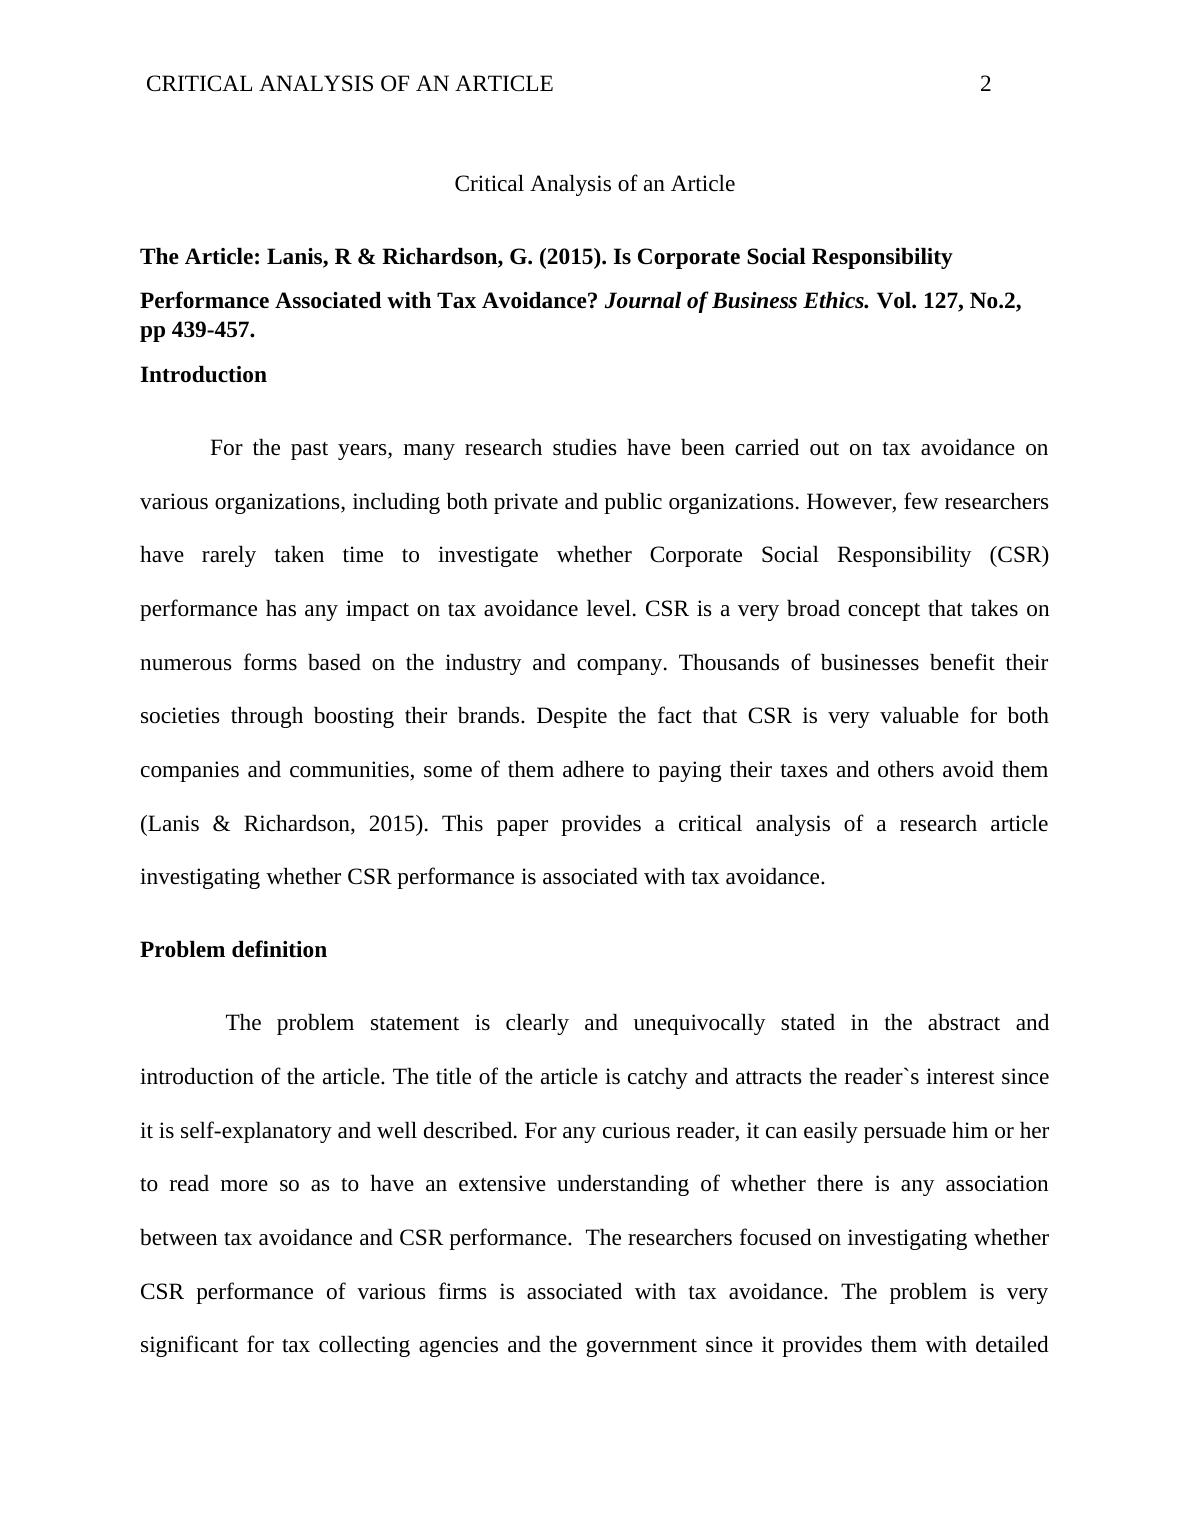 Critical Analysis of an Article on Corporate Social Responsibility and Tax Avoidance_2